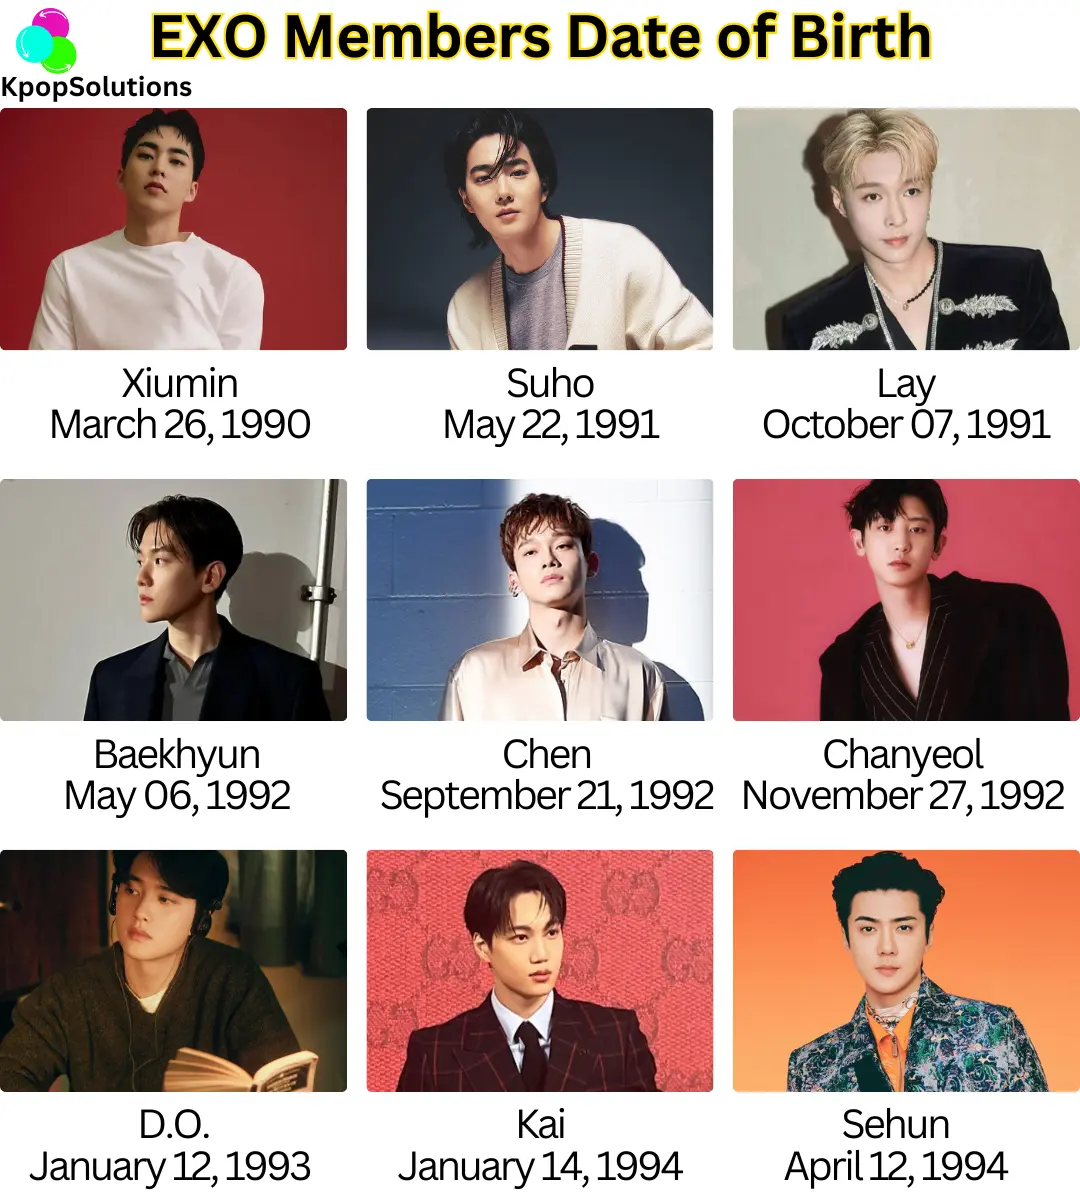 EXO Member date of birth and current ages: Xiumin, Suho, Lay, Baekhyun, Chen, Chanyeol, D.O., Kai, and Sehun.